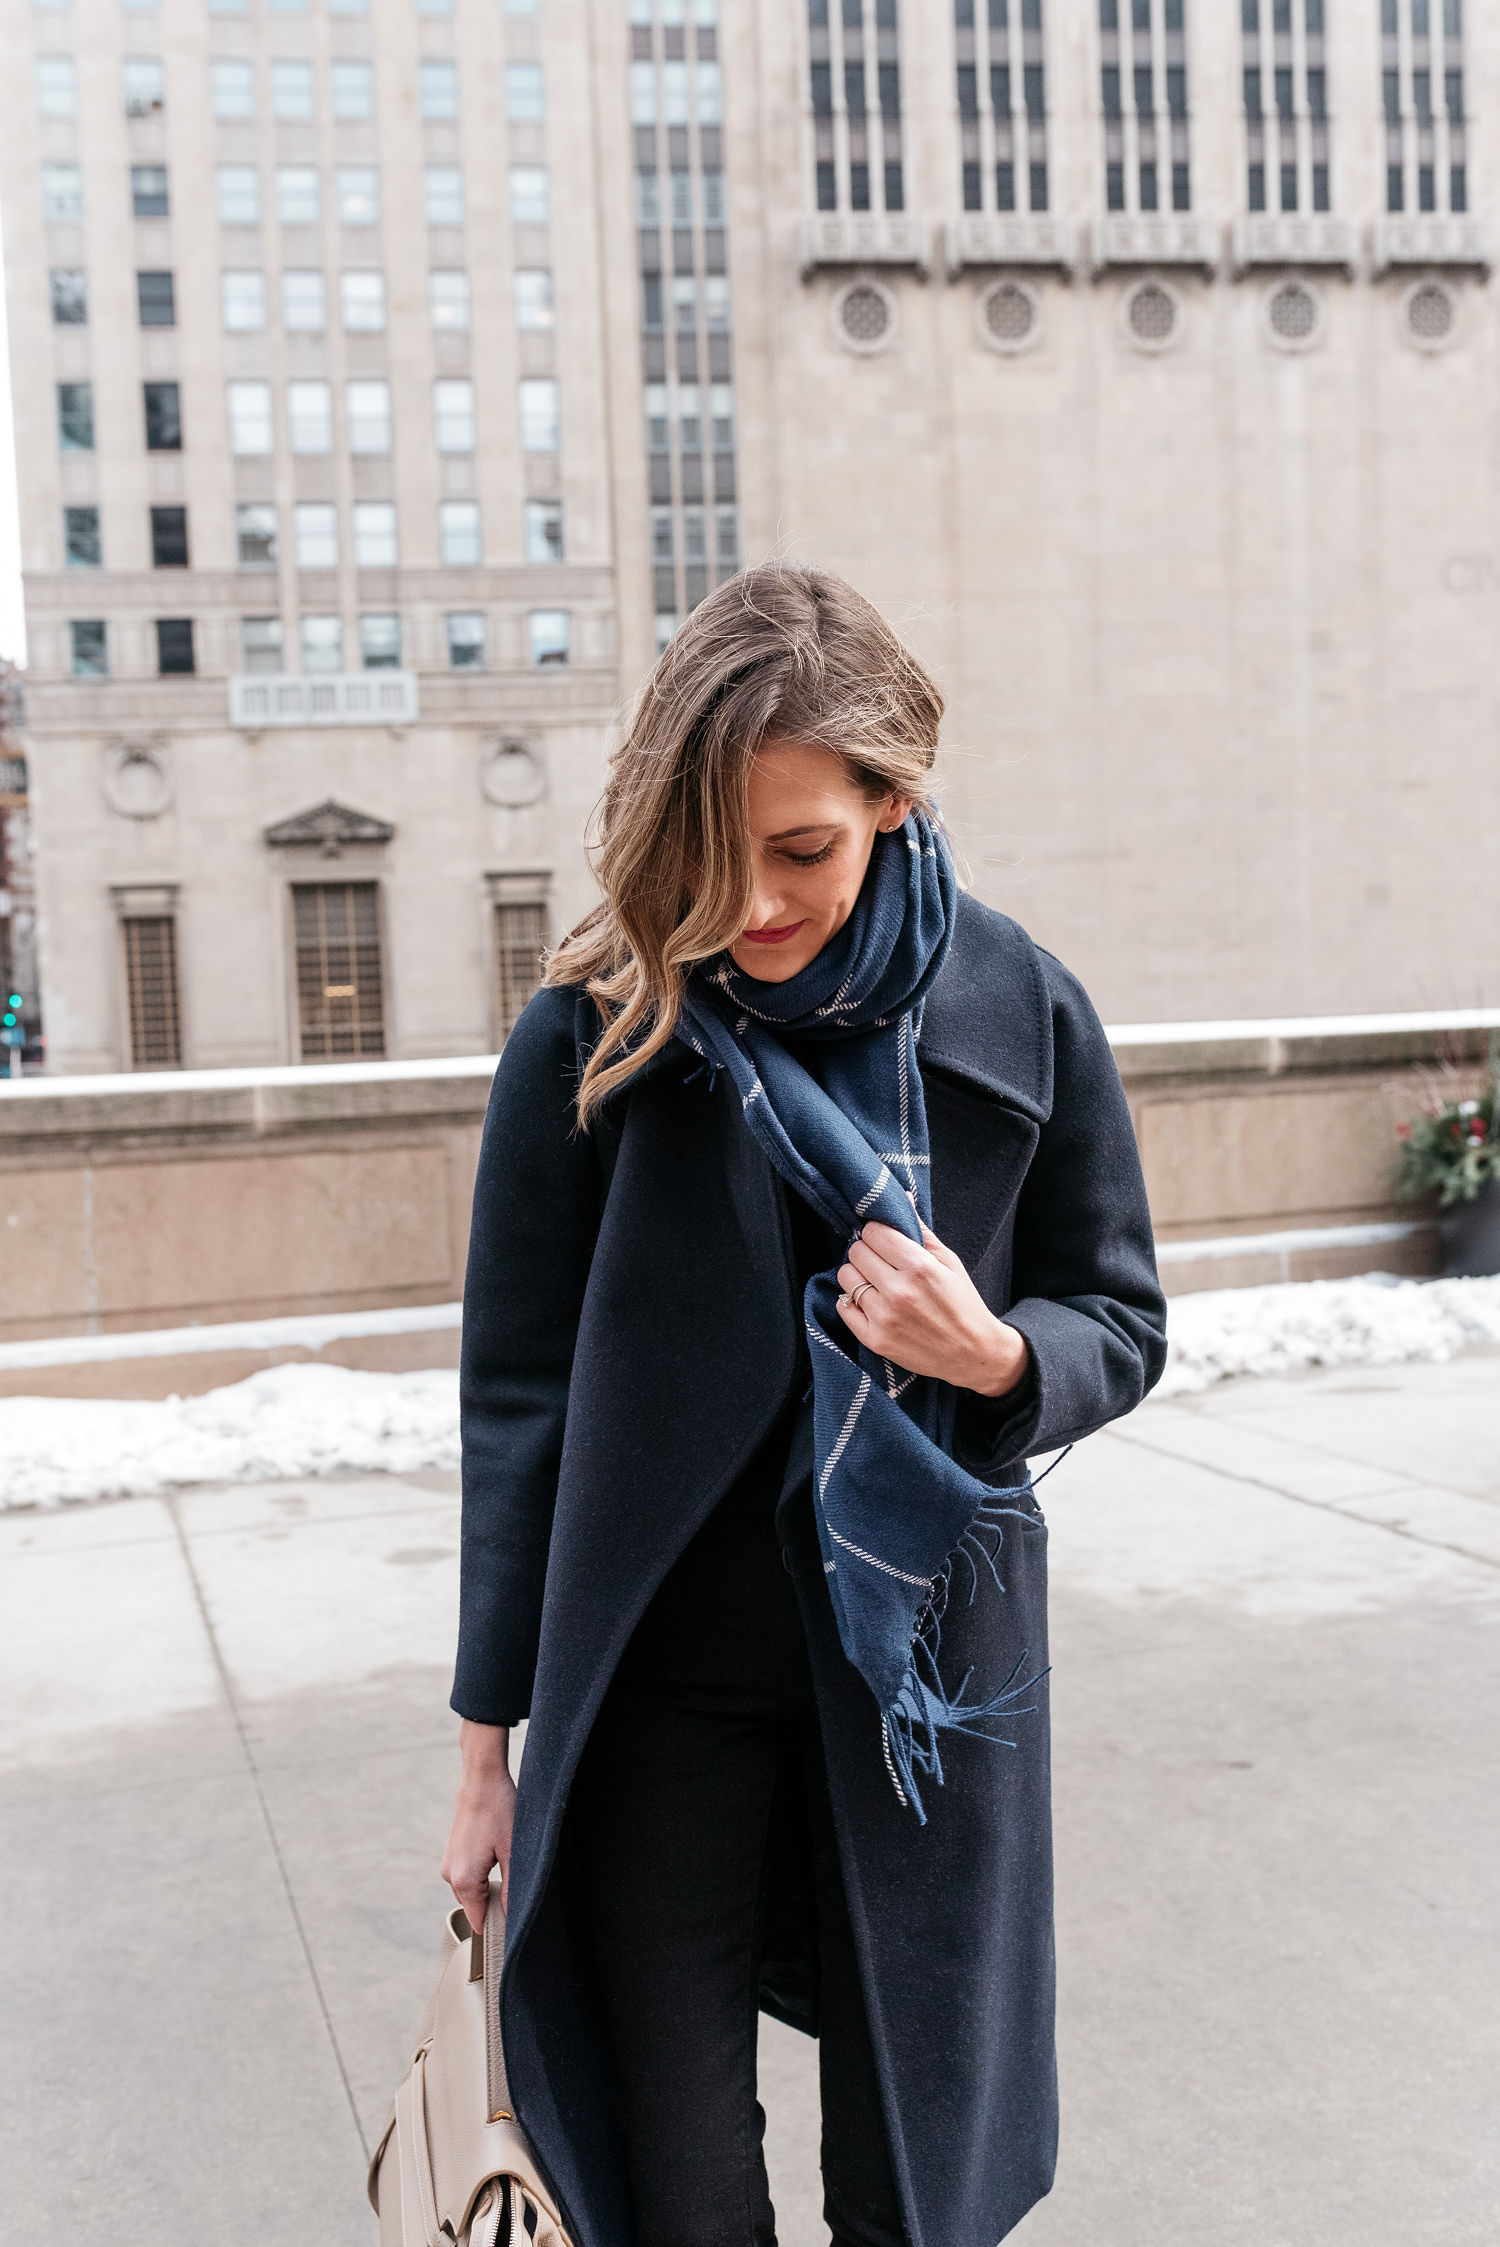 coldest day on record in chicago what to wear - See (Anna) Jane.